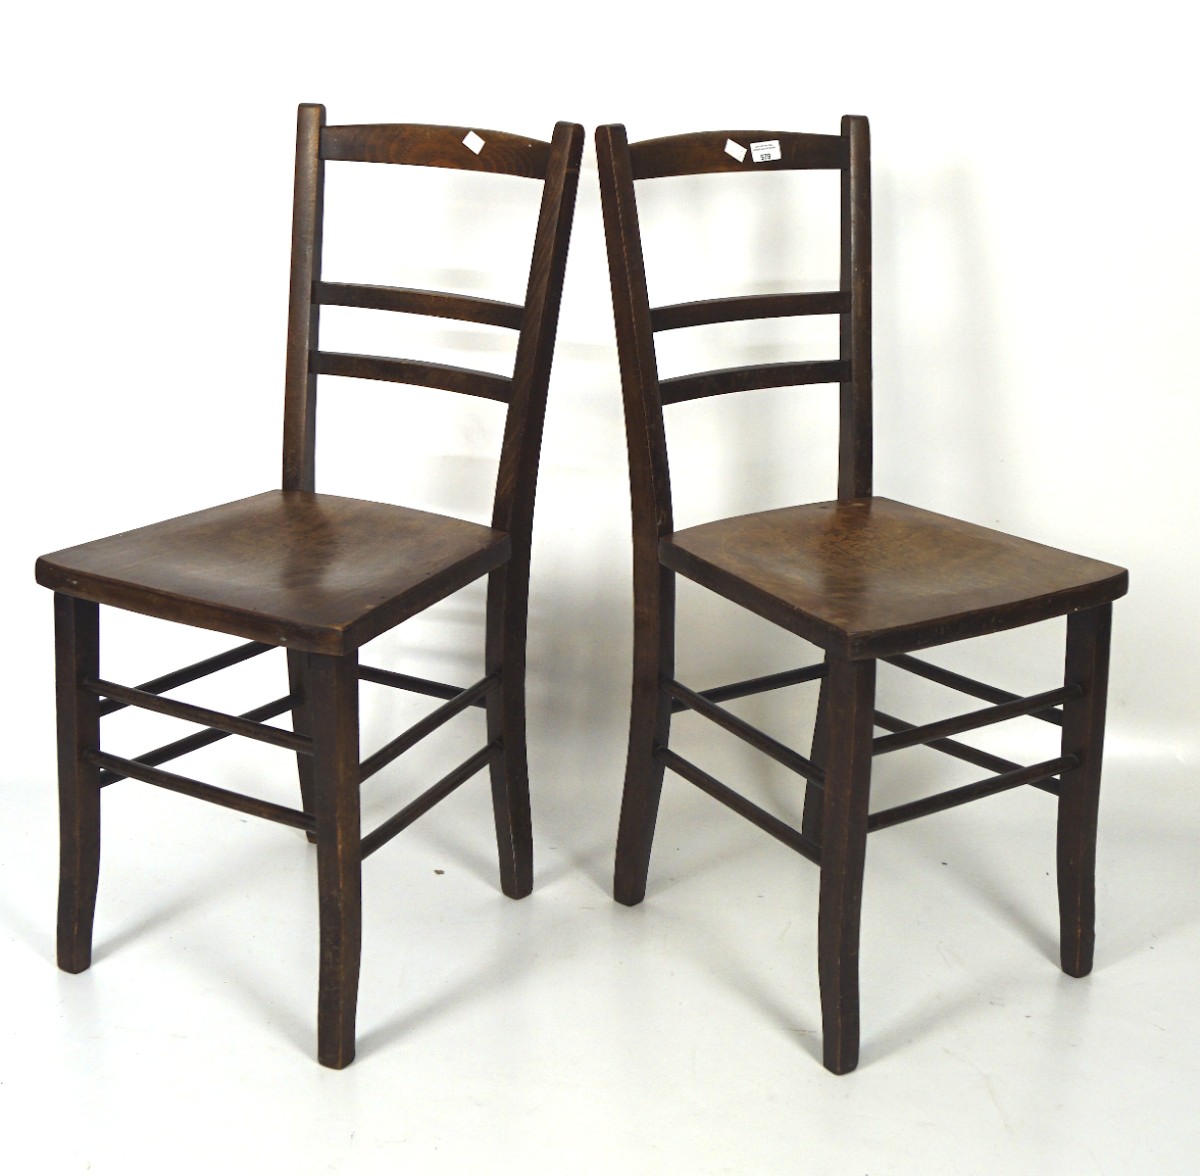 A pair of early 20th century cafe style chairs,